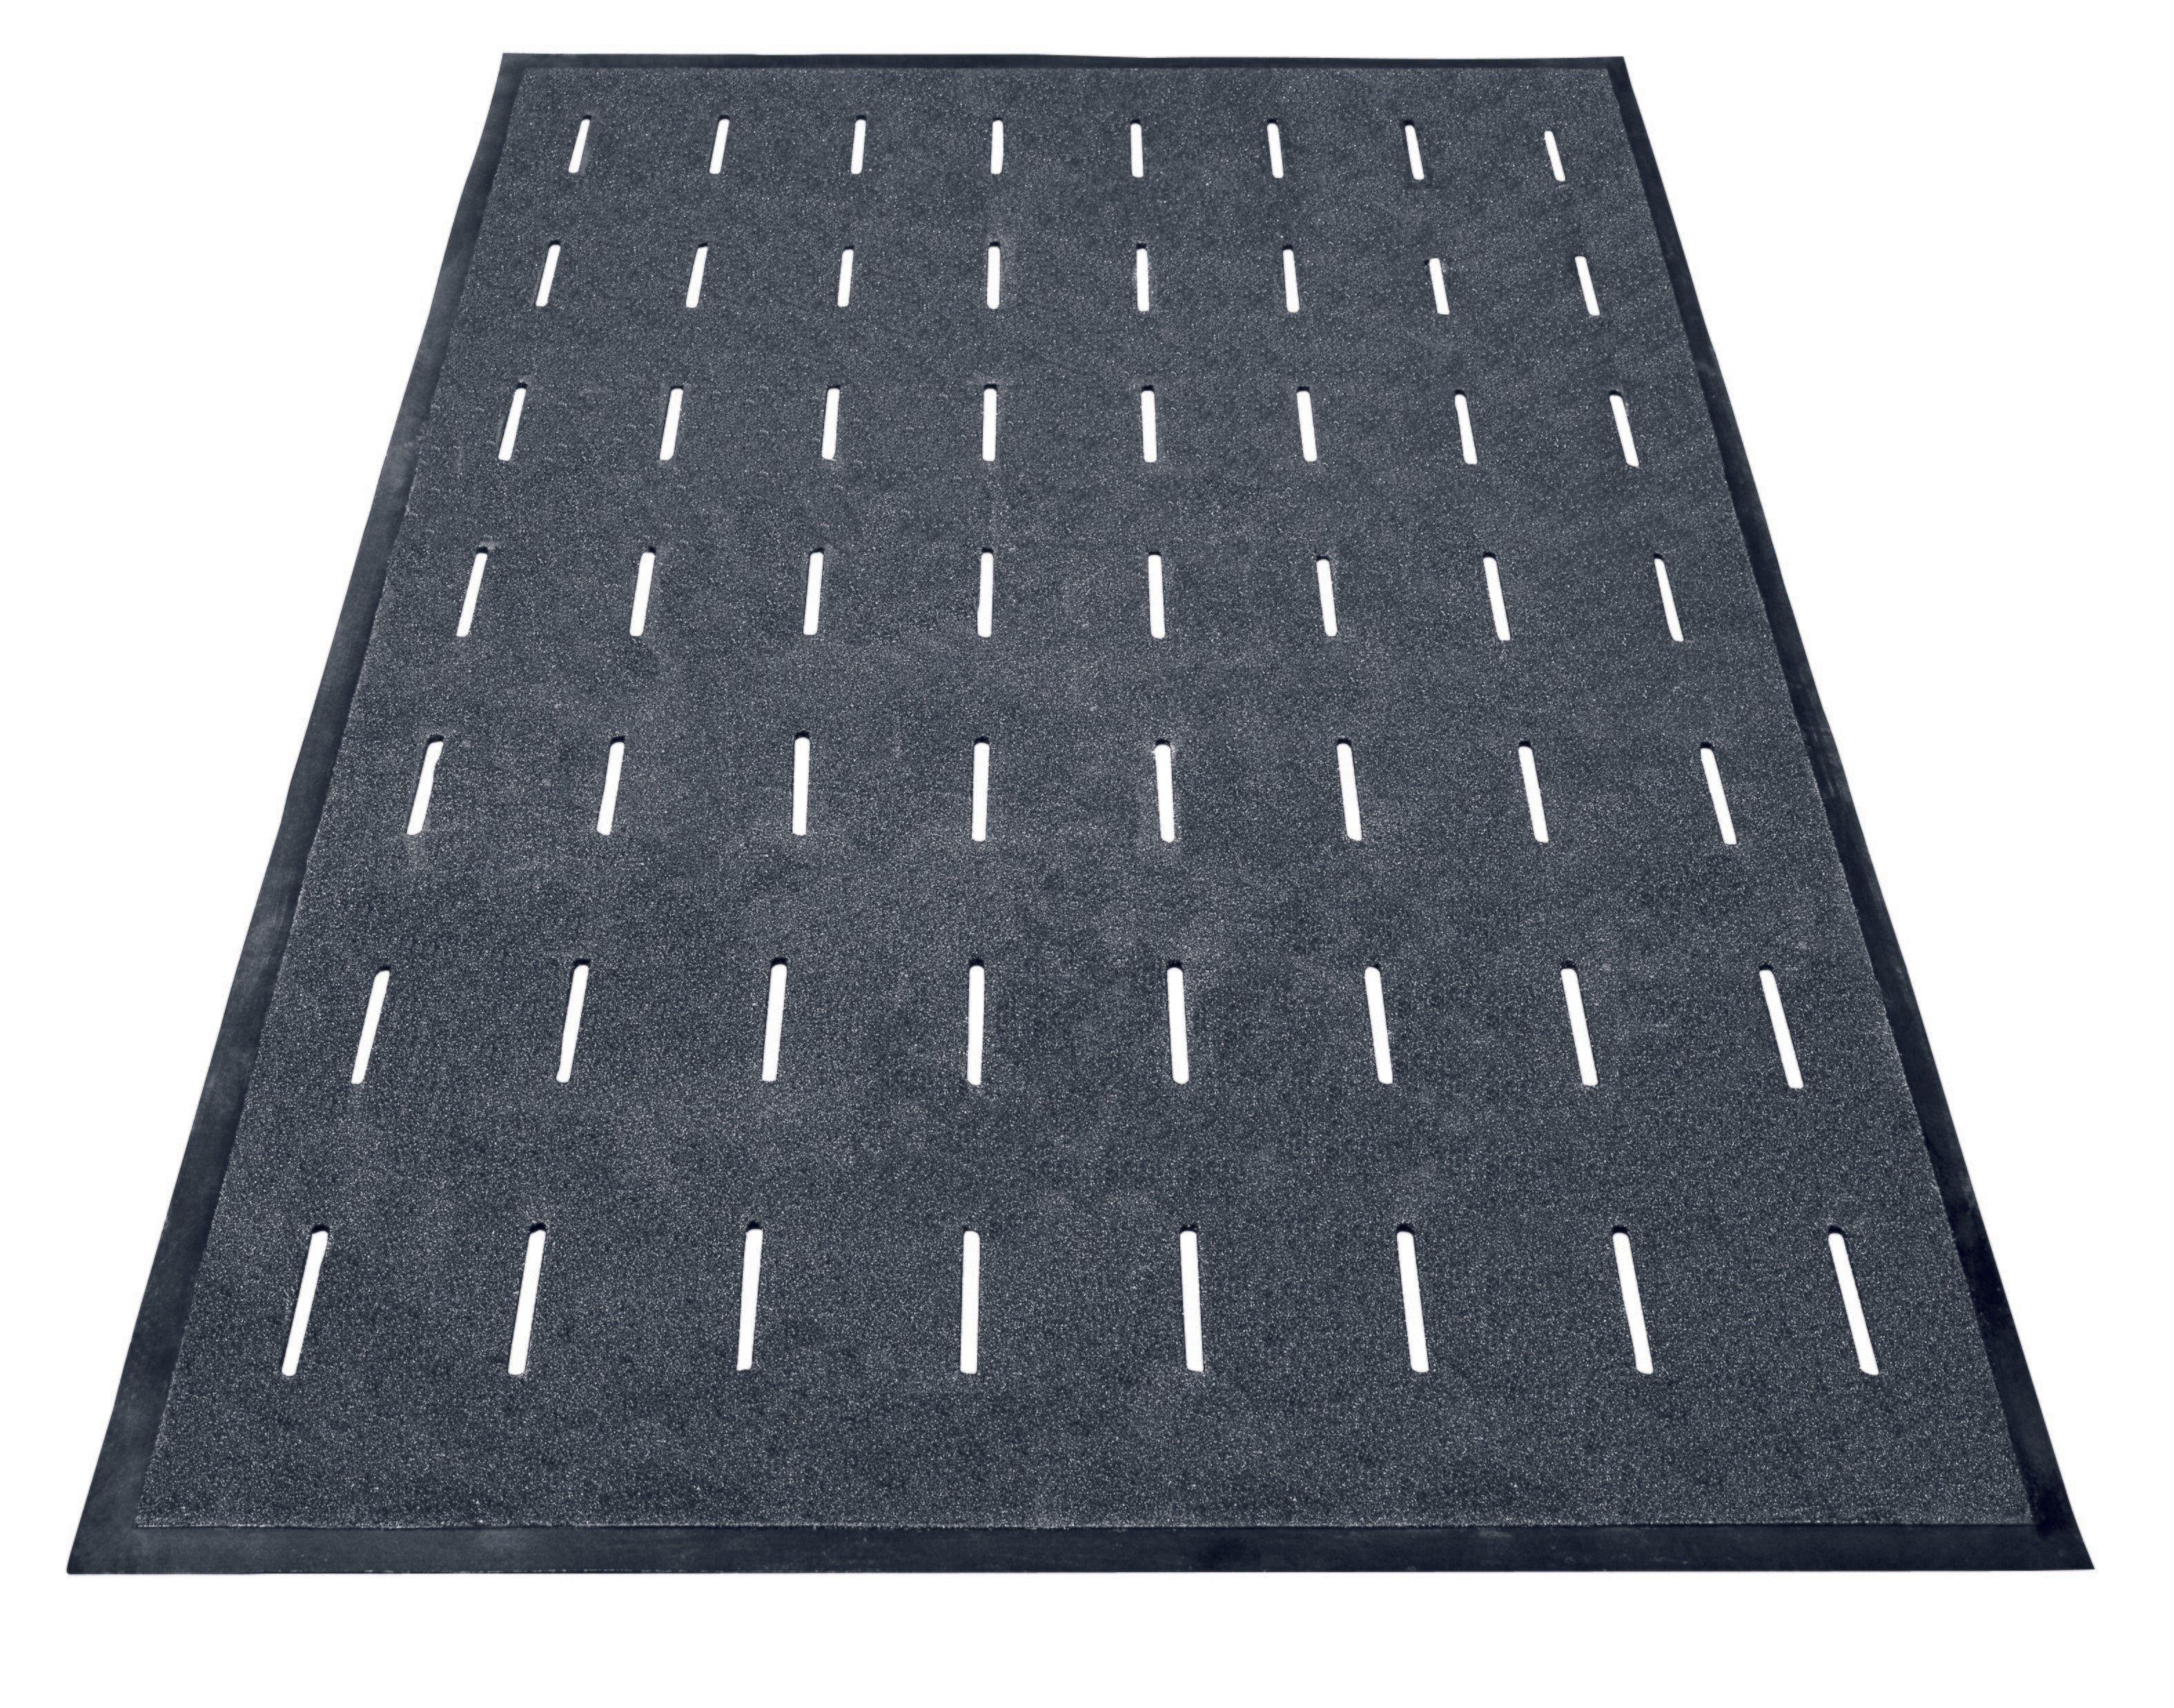 The Mighty Mat Classic from Shoes For Crews is an essential piece of safety equipment that provides additional protection against greasy and slippery surfaces.